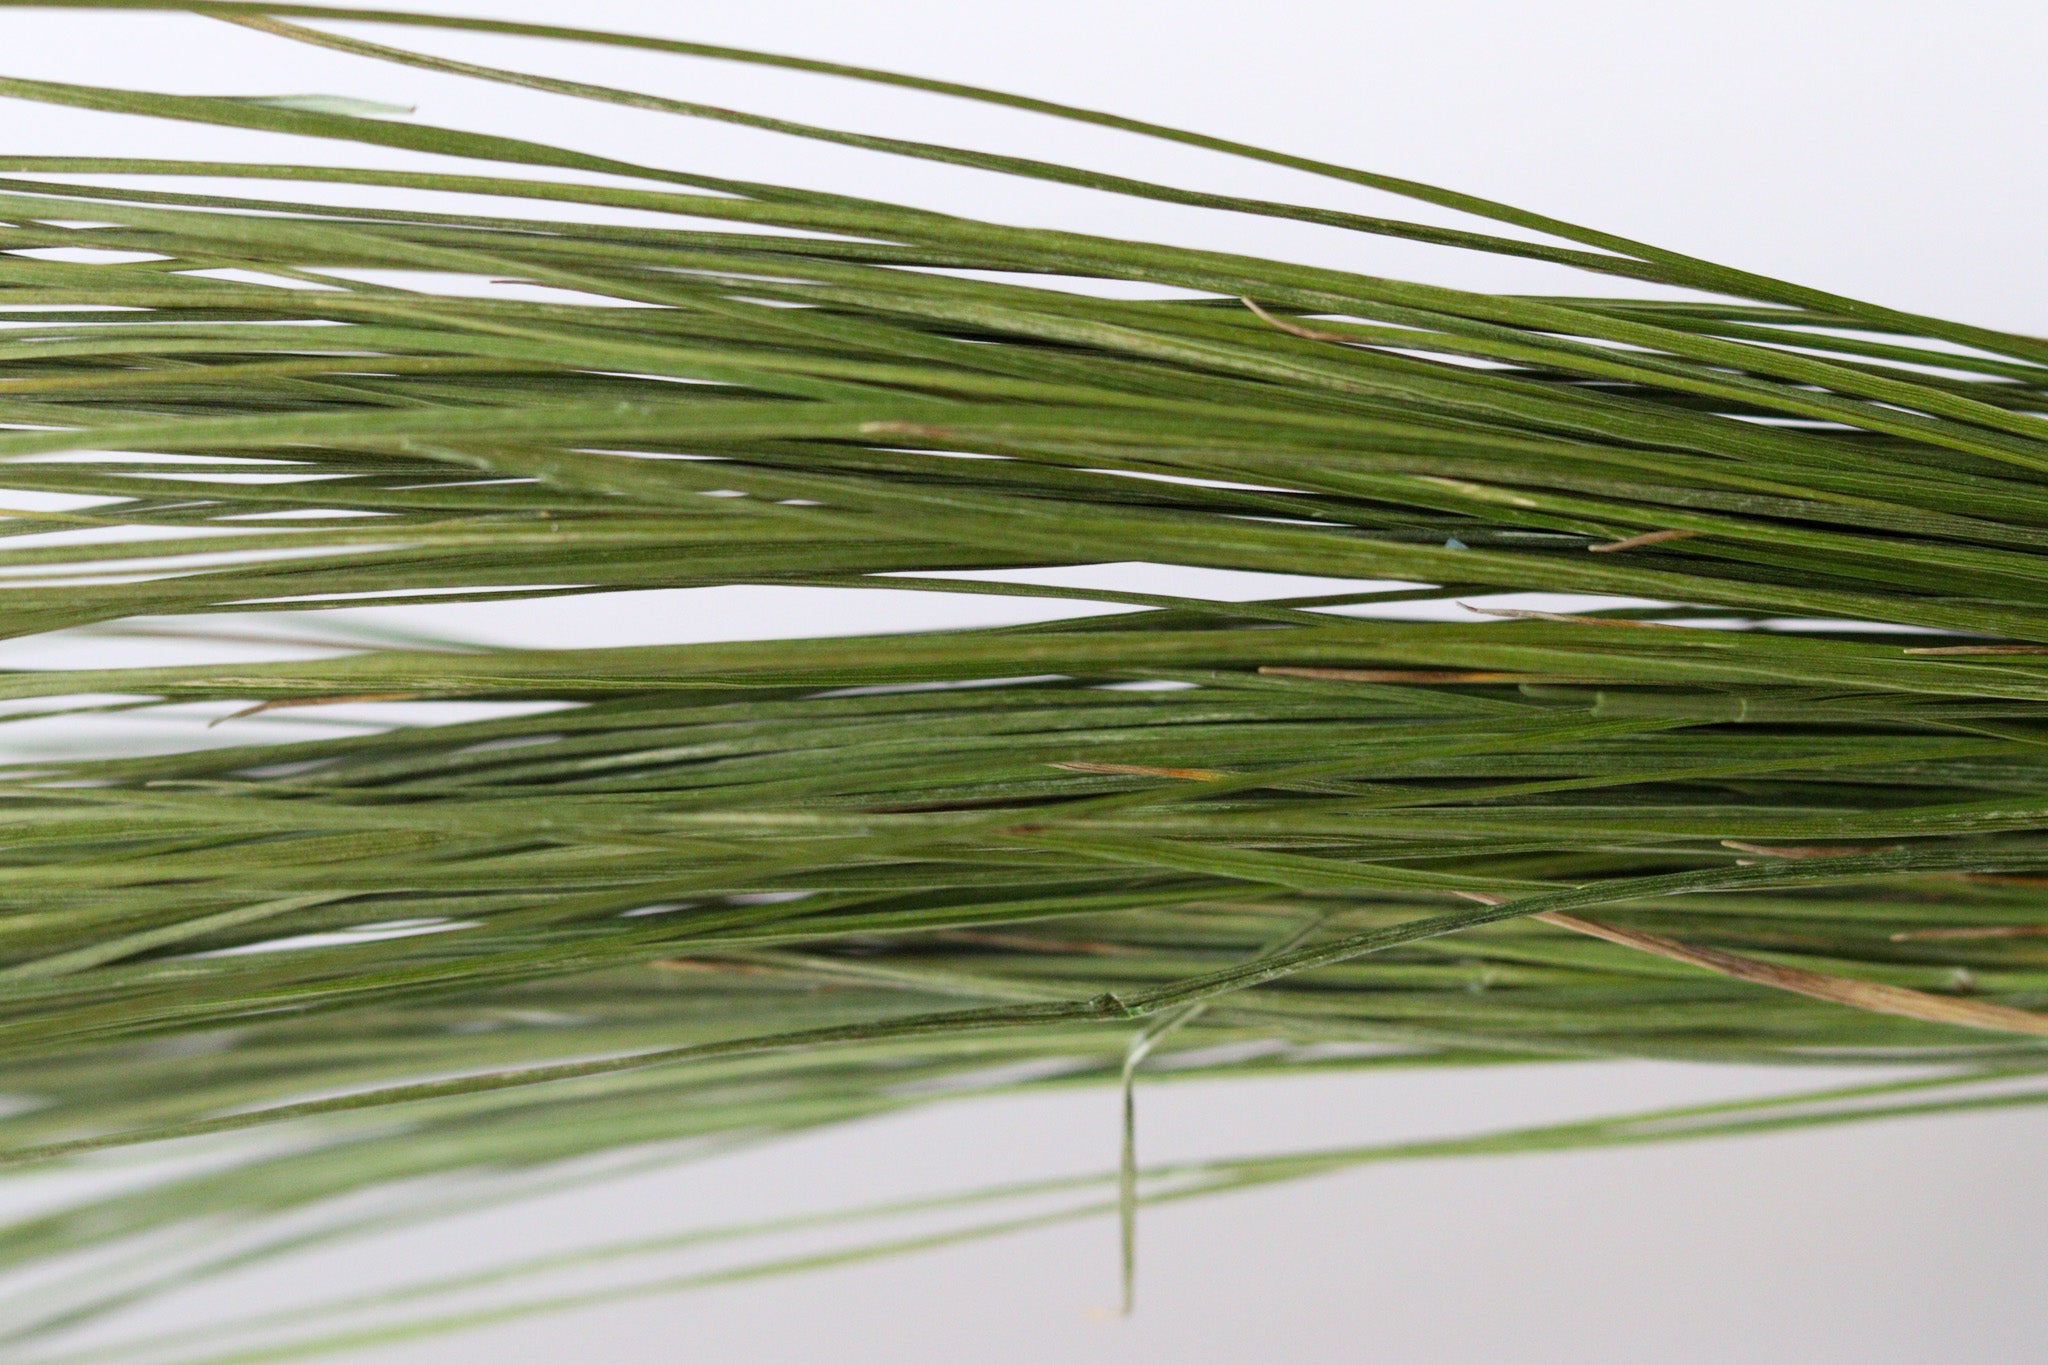 Sweetgrass Repels Mosquitoes